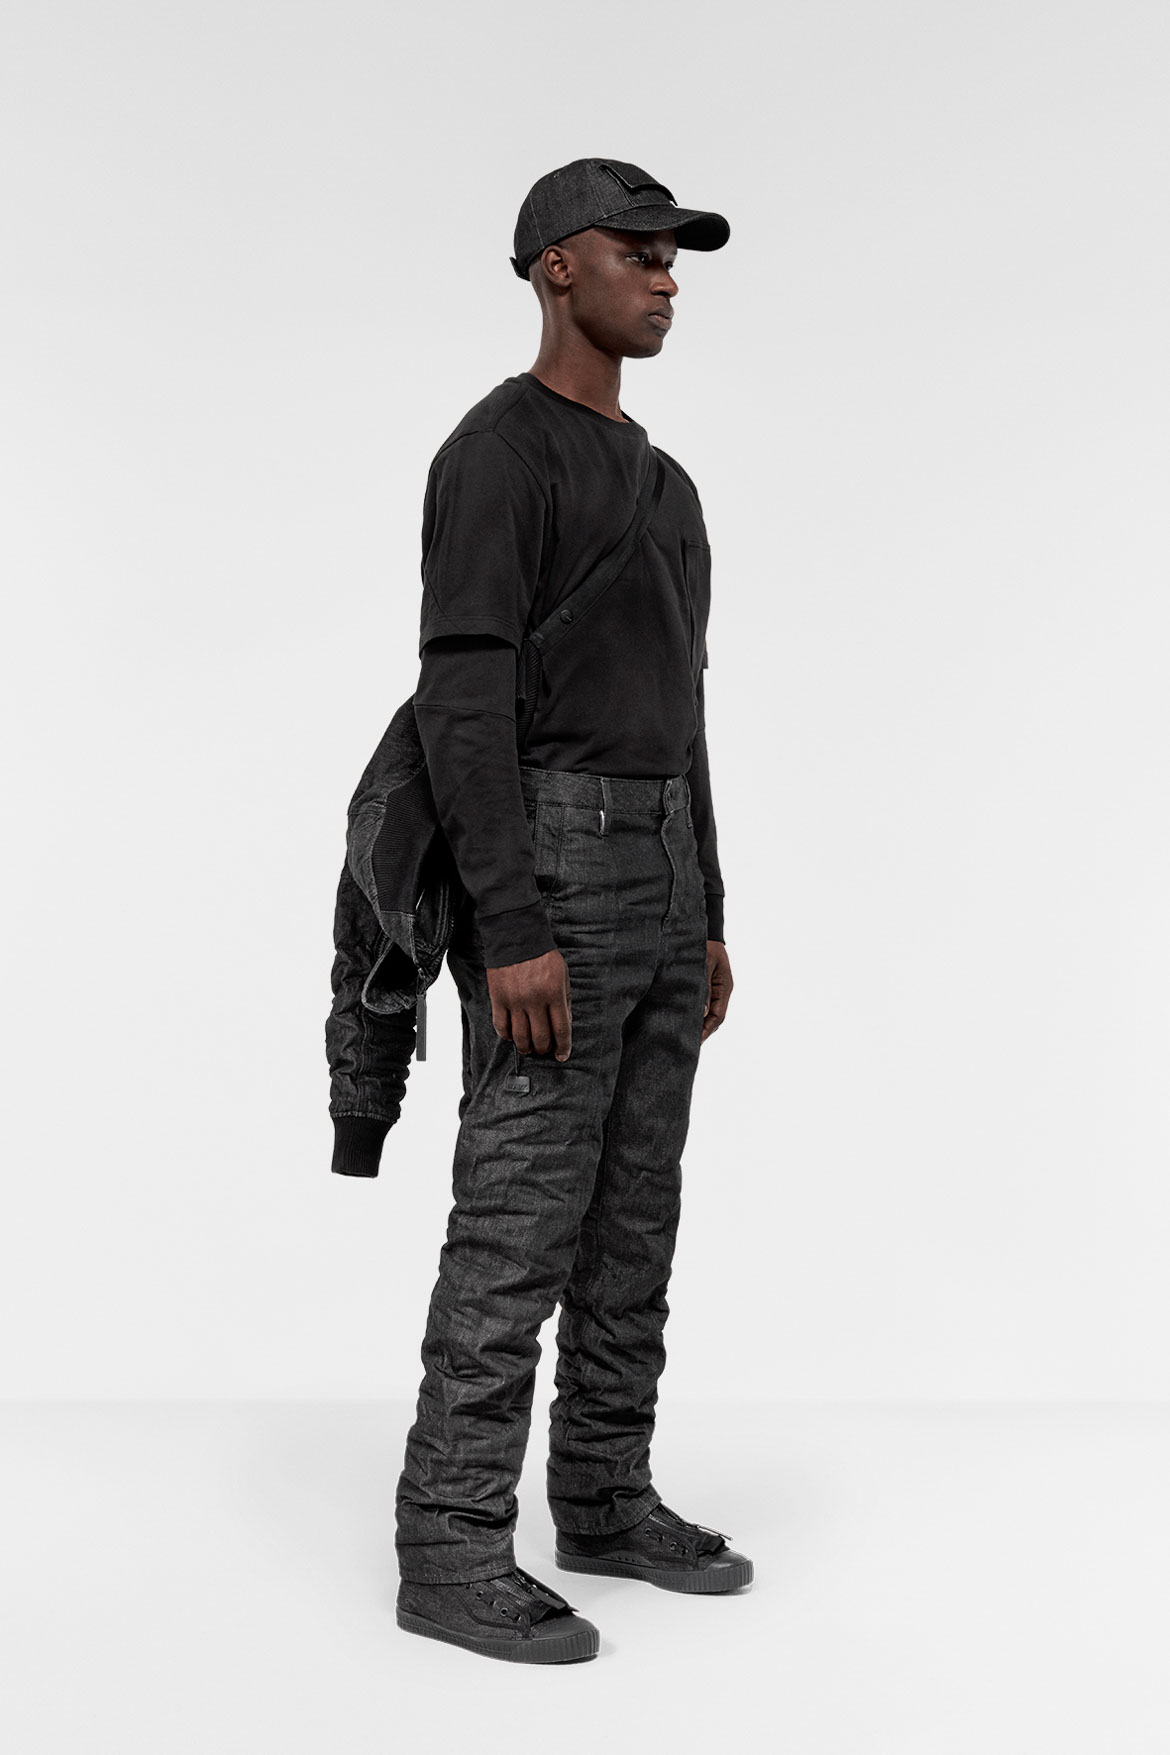 G-STAR-RAW-RESEARCH-II-BY-AITOR-THROUP-3